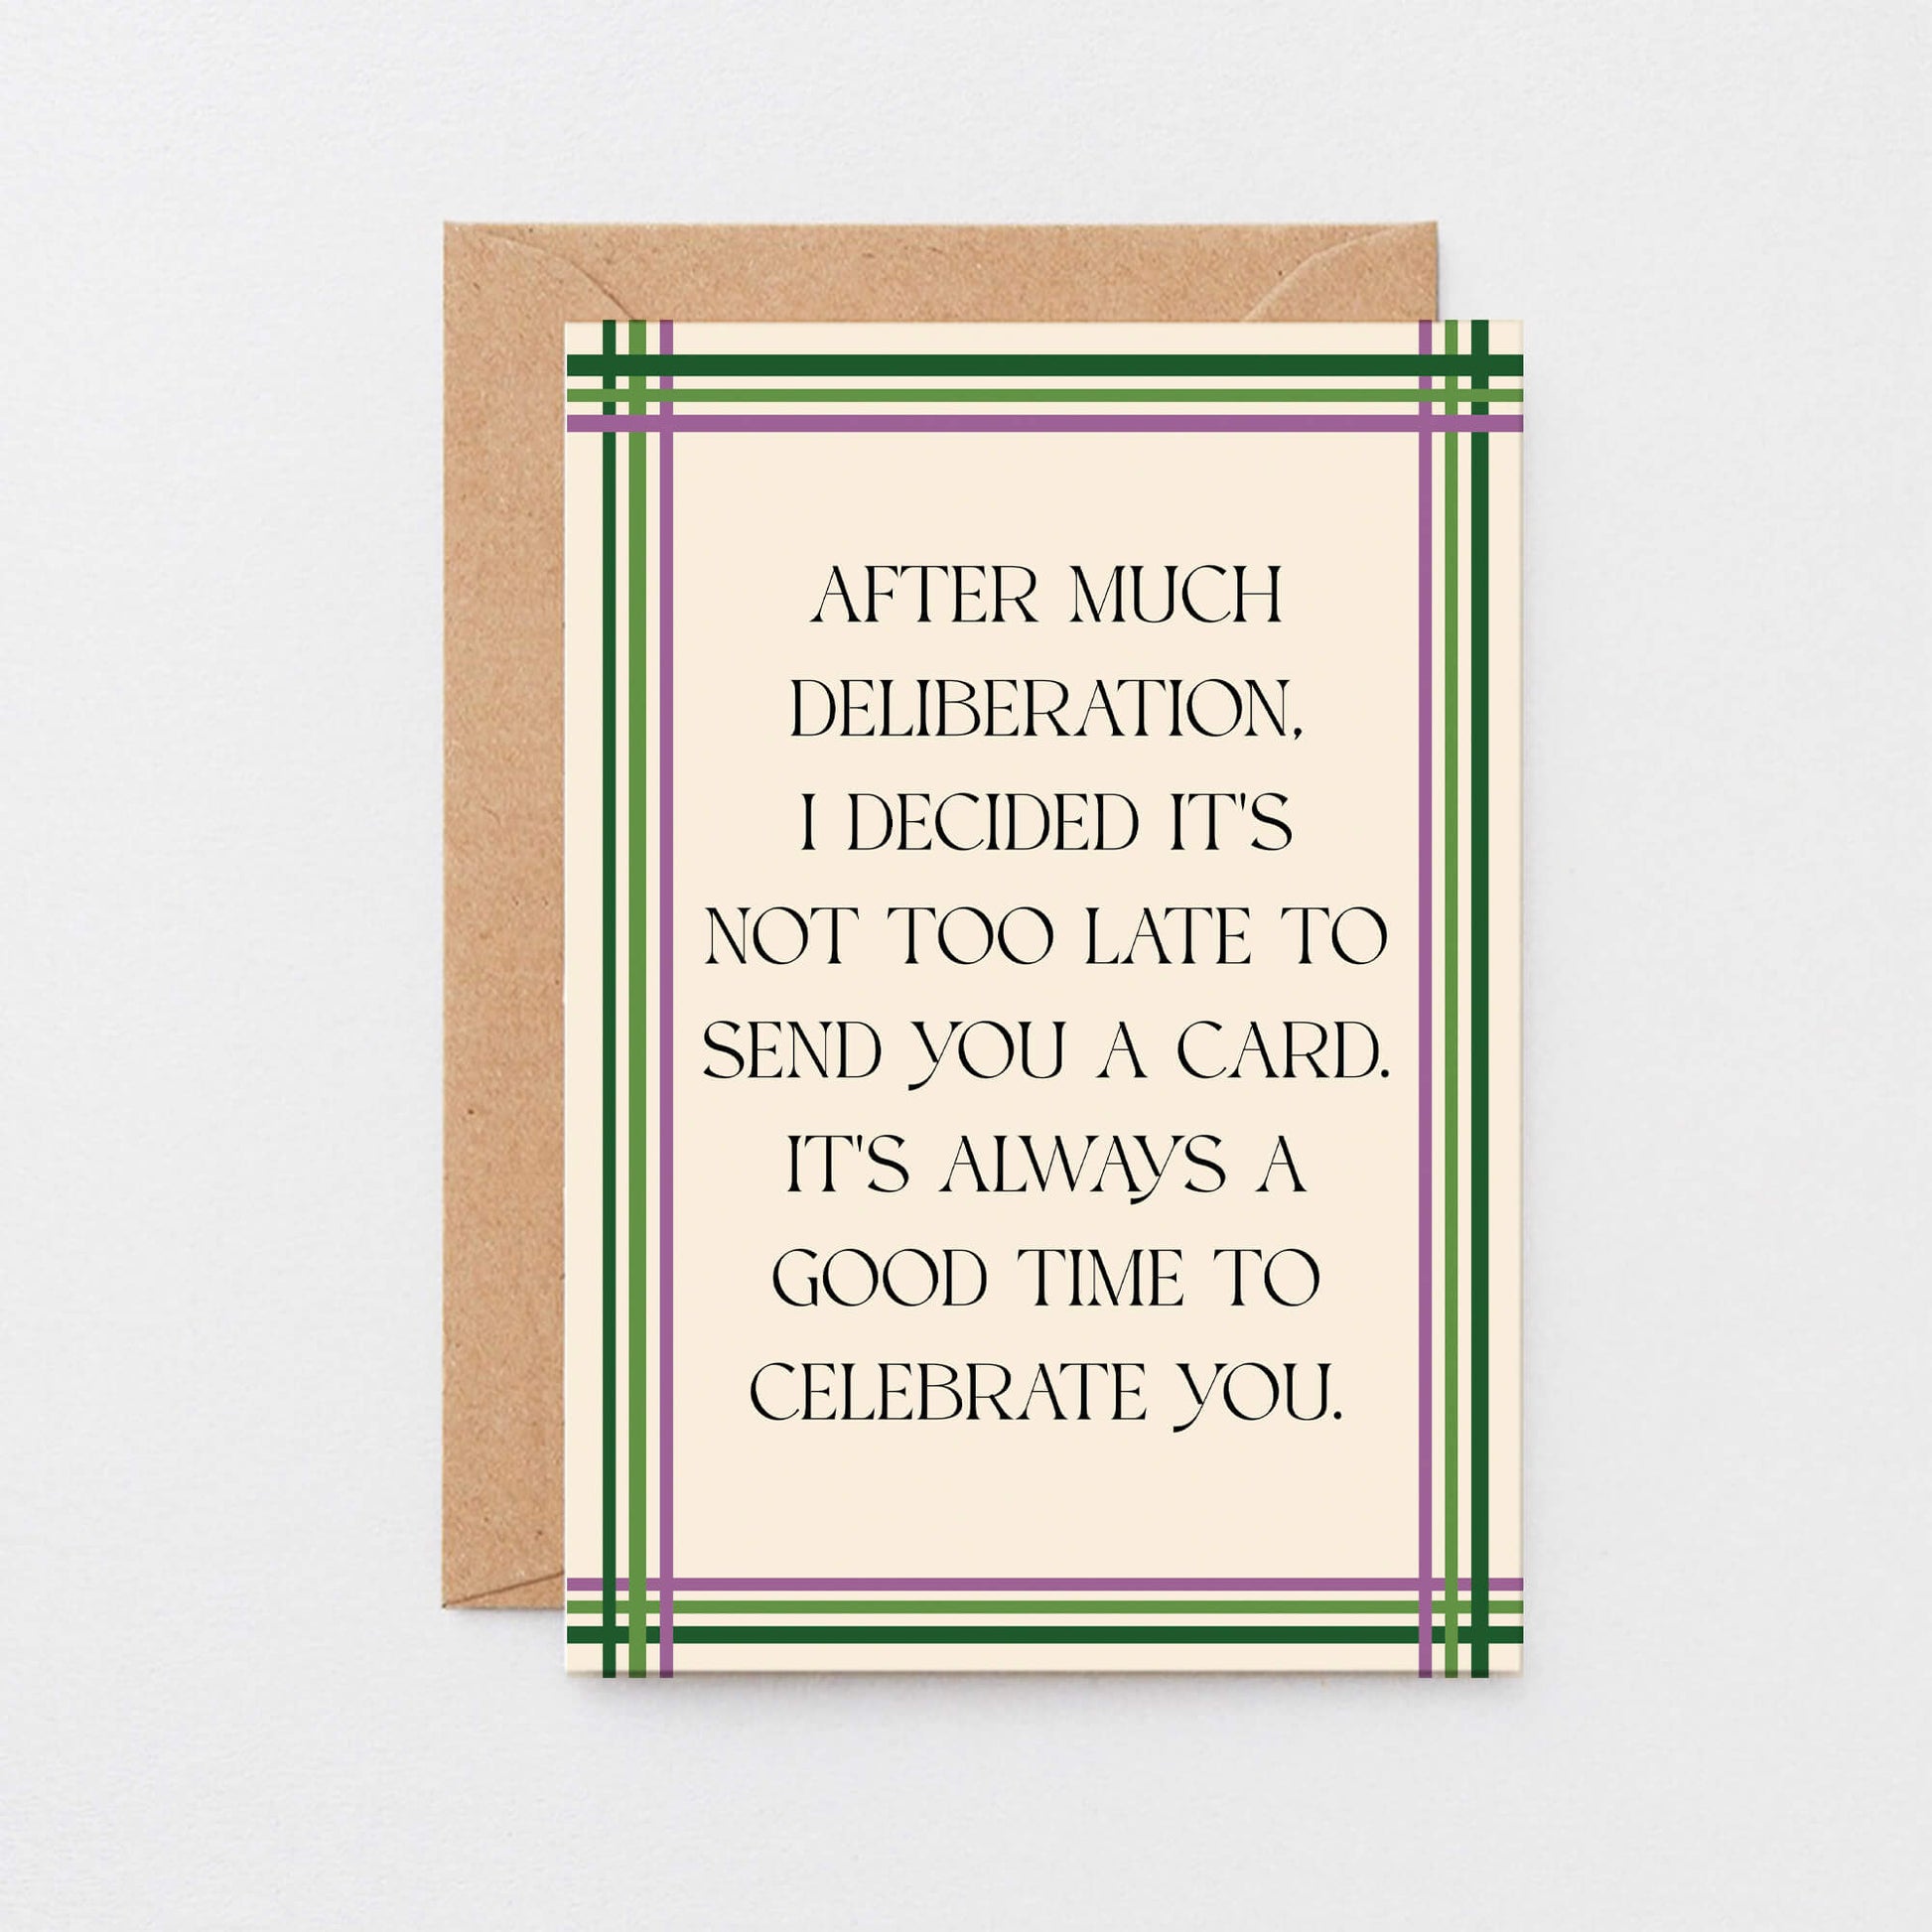 Belated Card by SixElevenCreations. Reads After much deliberation, I decided it's not too late to send you a card. It's always a good time to celebrate you. Product Code SE0904A6